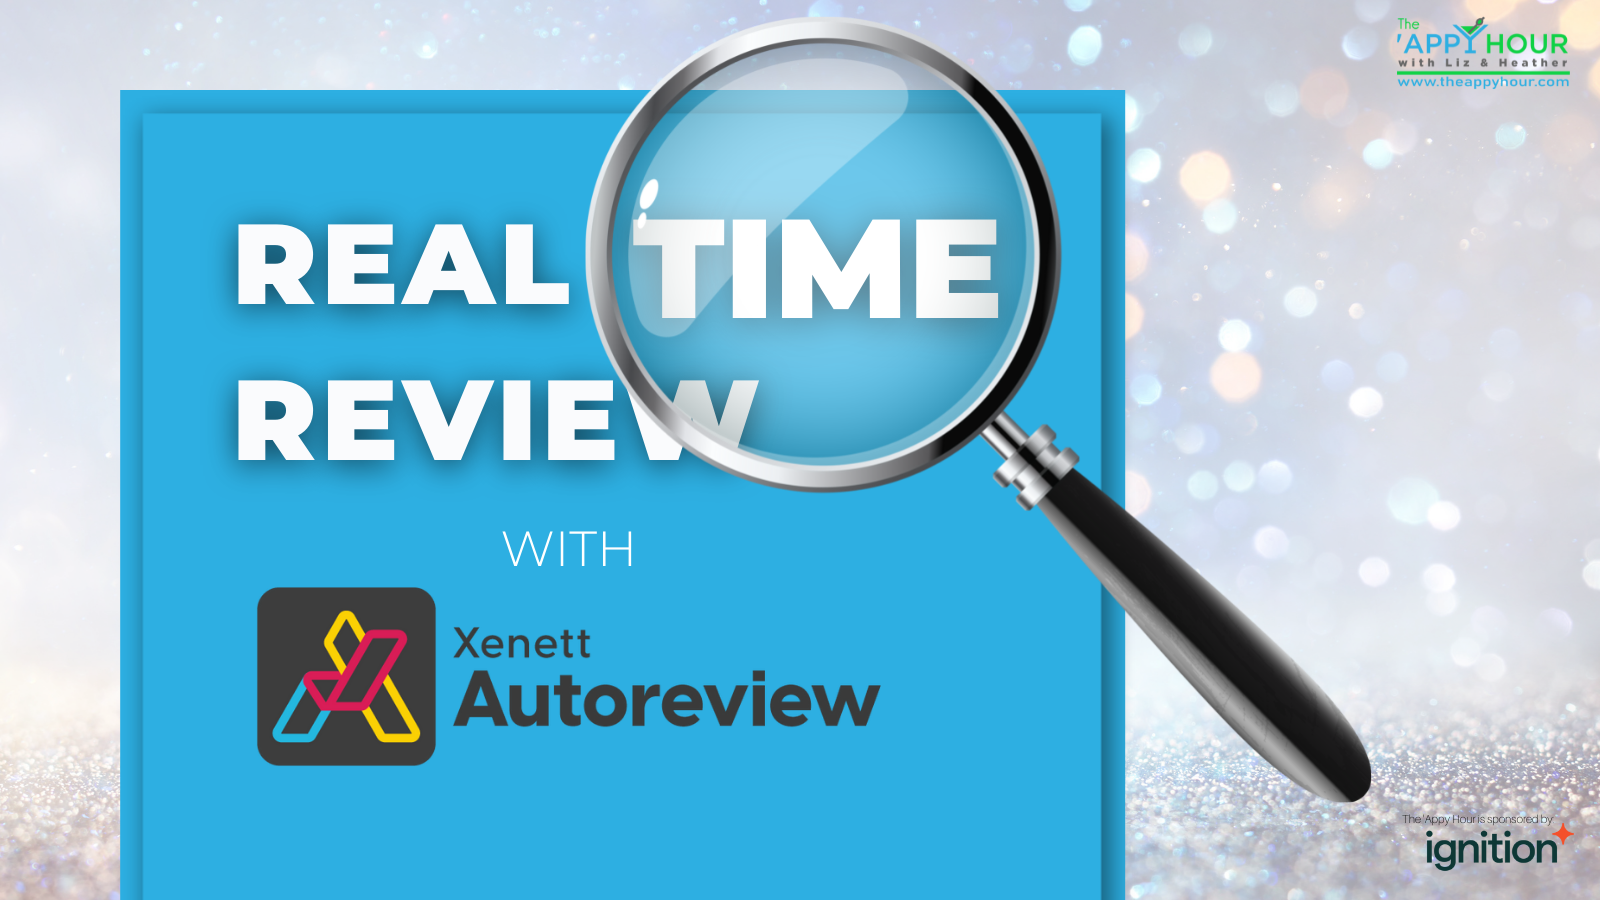 Real Time Review with Xenett Autoreview